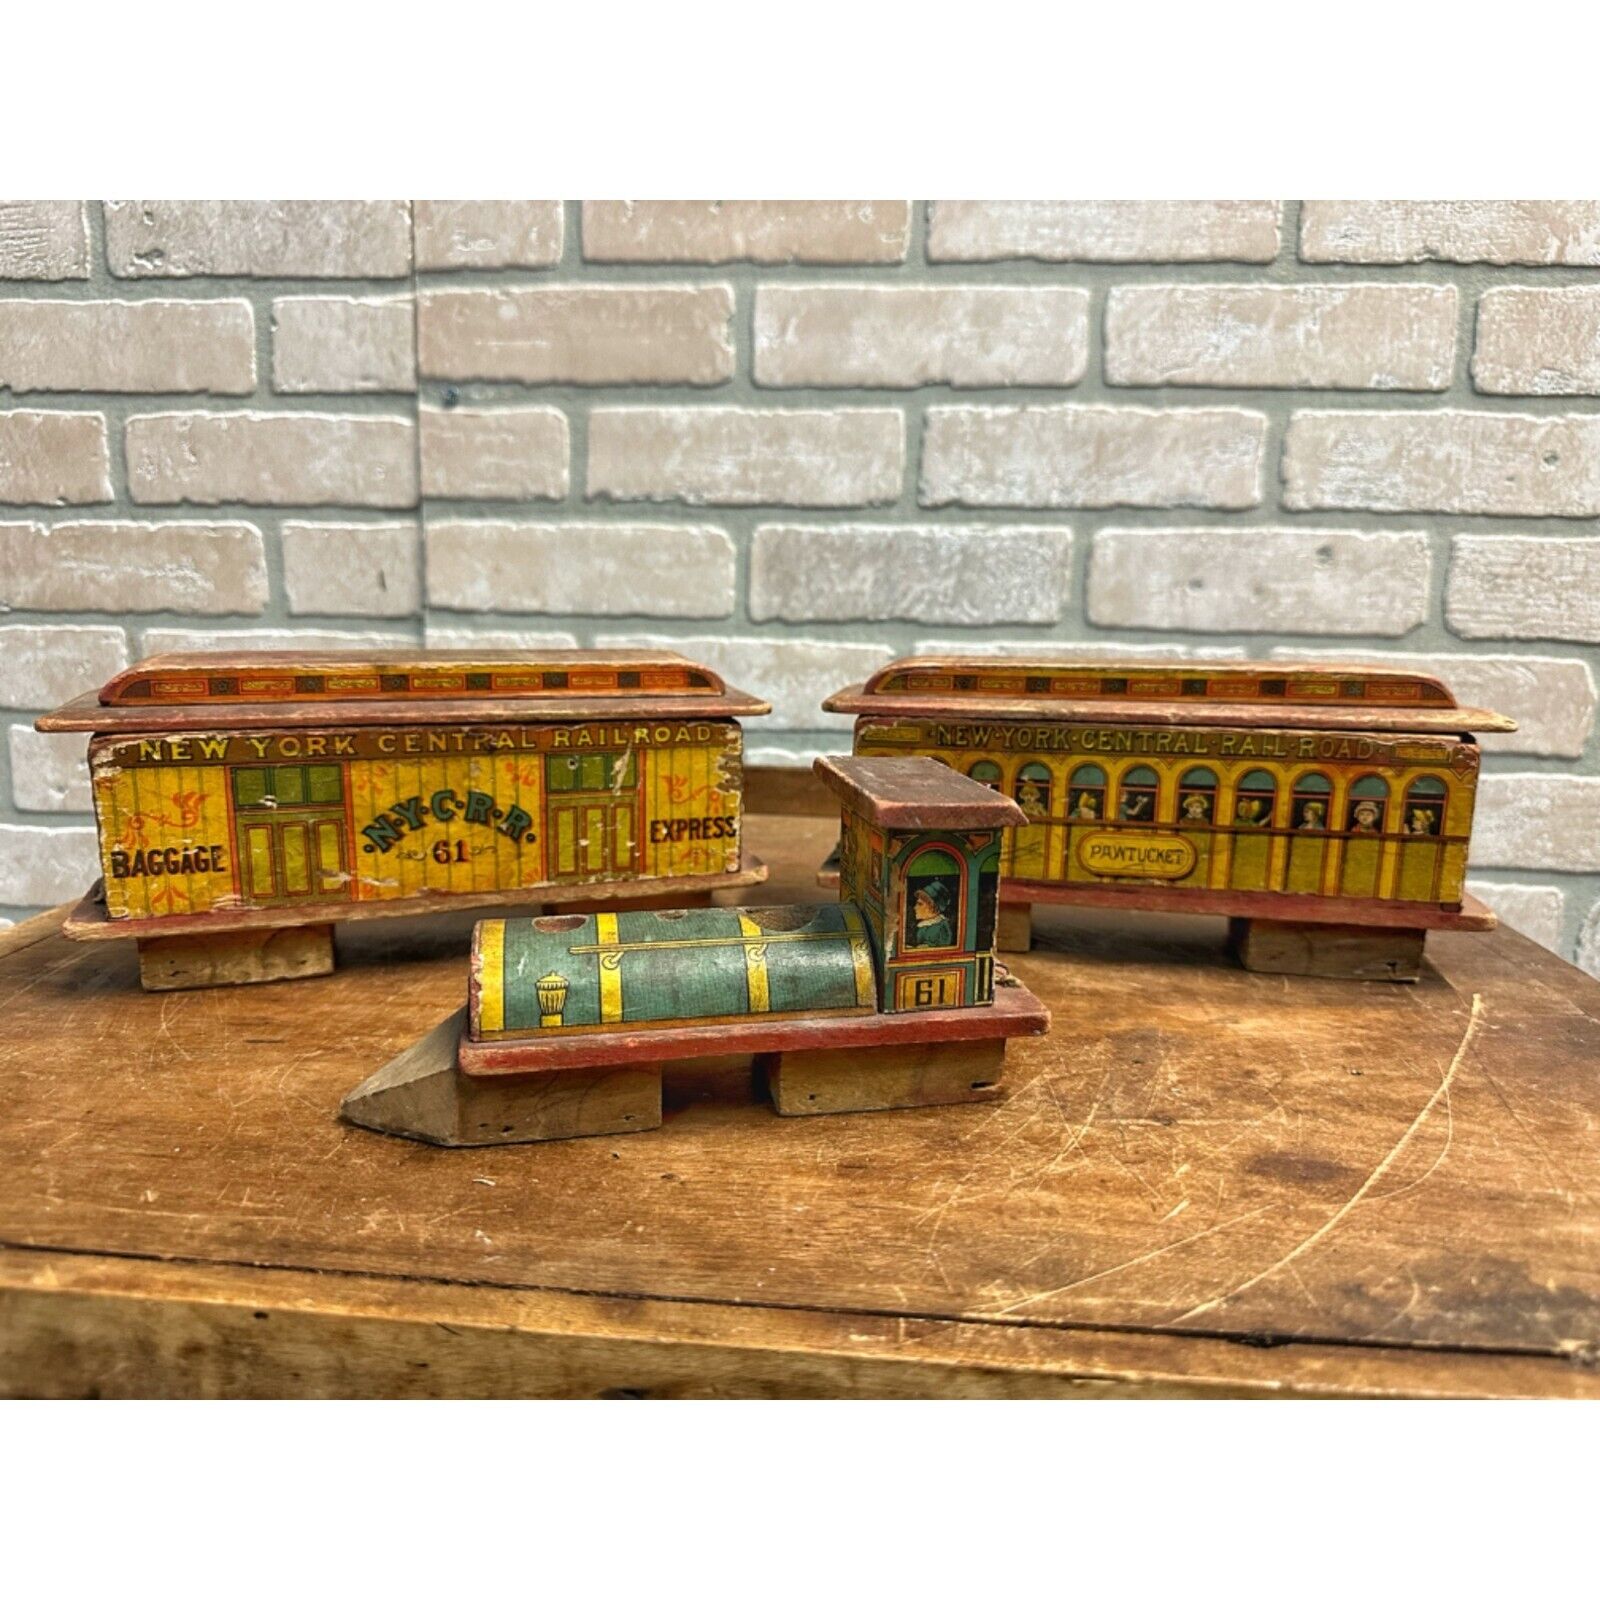 RARE Vintage Early 1900s New York Central Railroad Lithograph Wooden Toy Train +